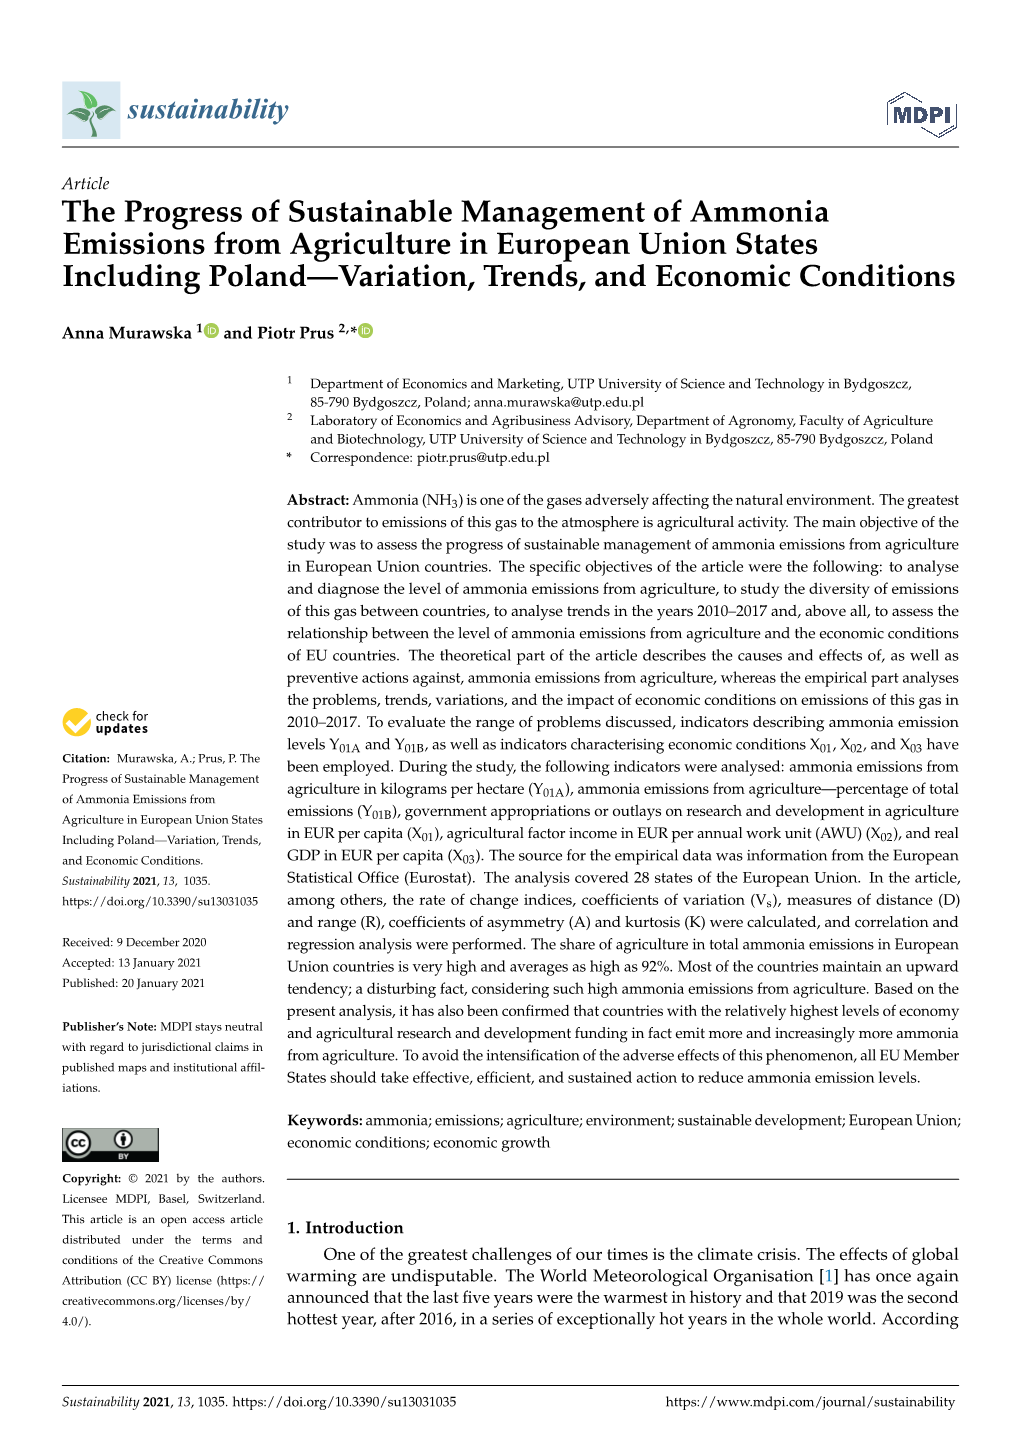 The Progress of Sustainable Management of Ammonia Emissions from Agriculture in European Union States Including Poland—Variation, Trends, and Economic Conditions